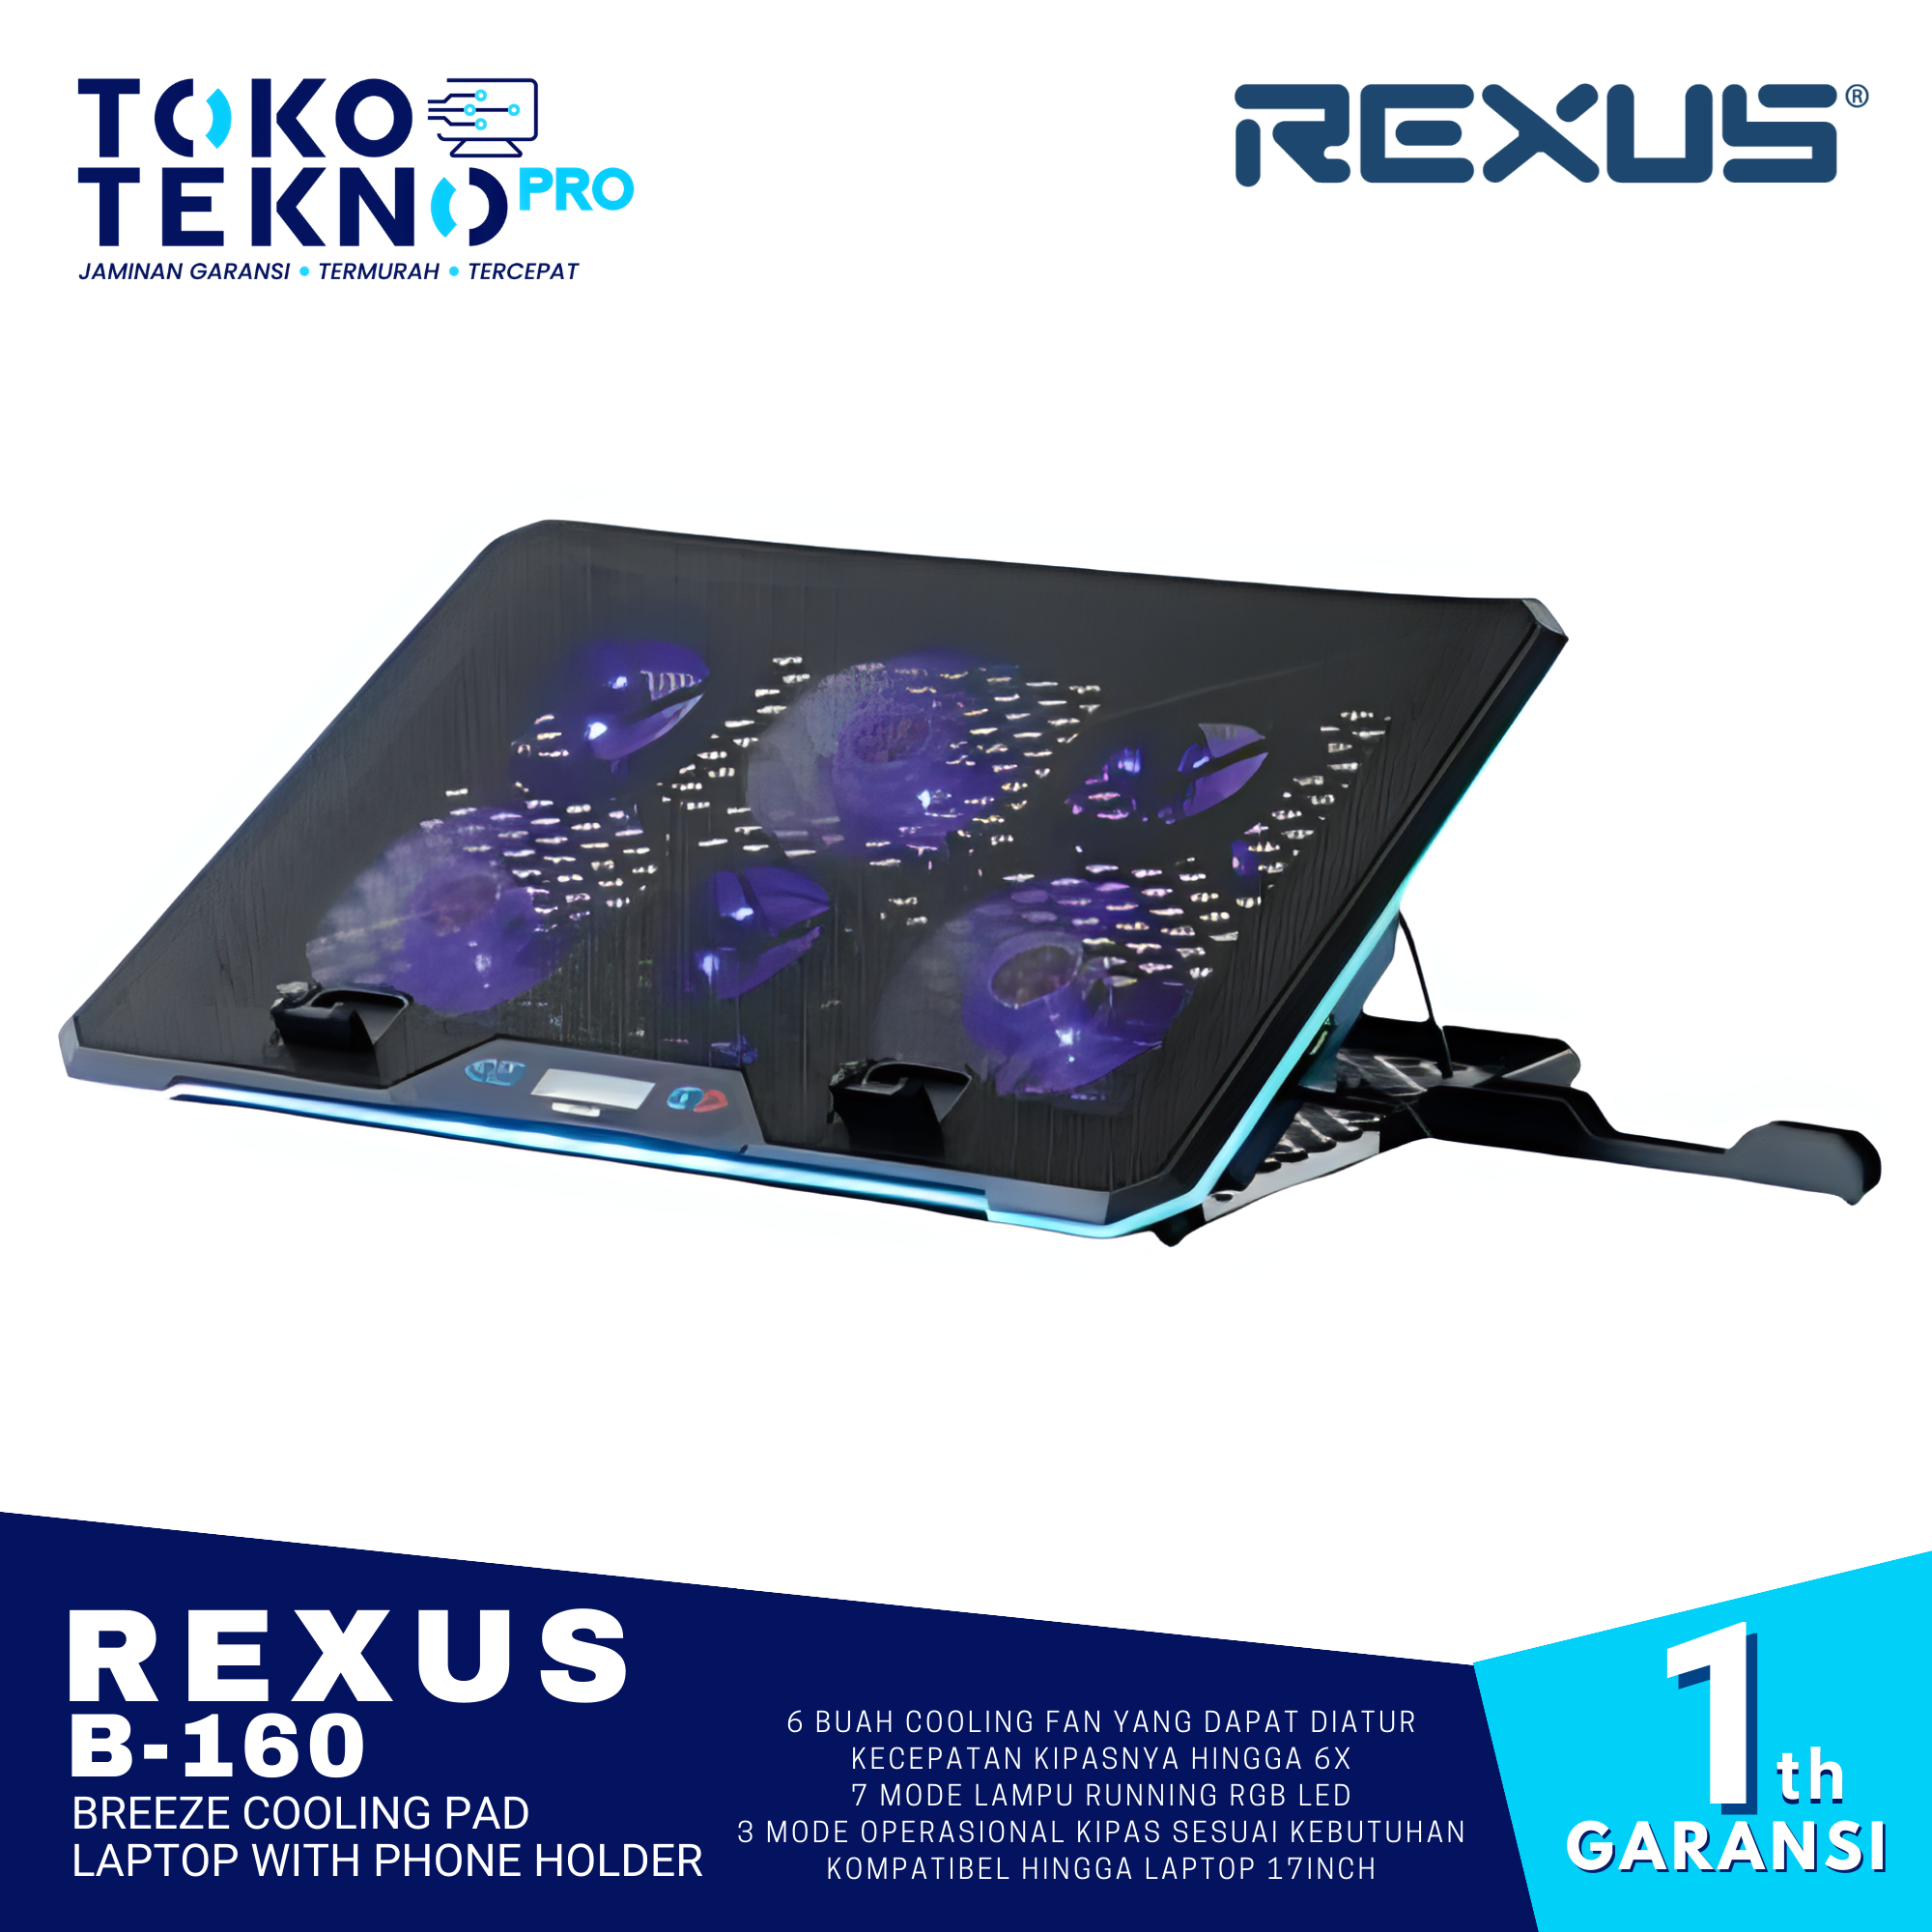 Rexus B160 Breeze Cooling Pad Laptop With Phone Holder